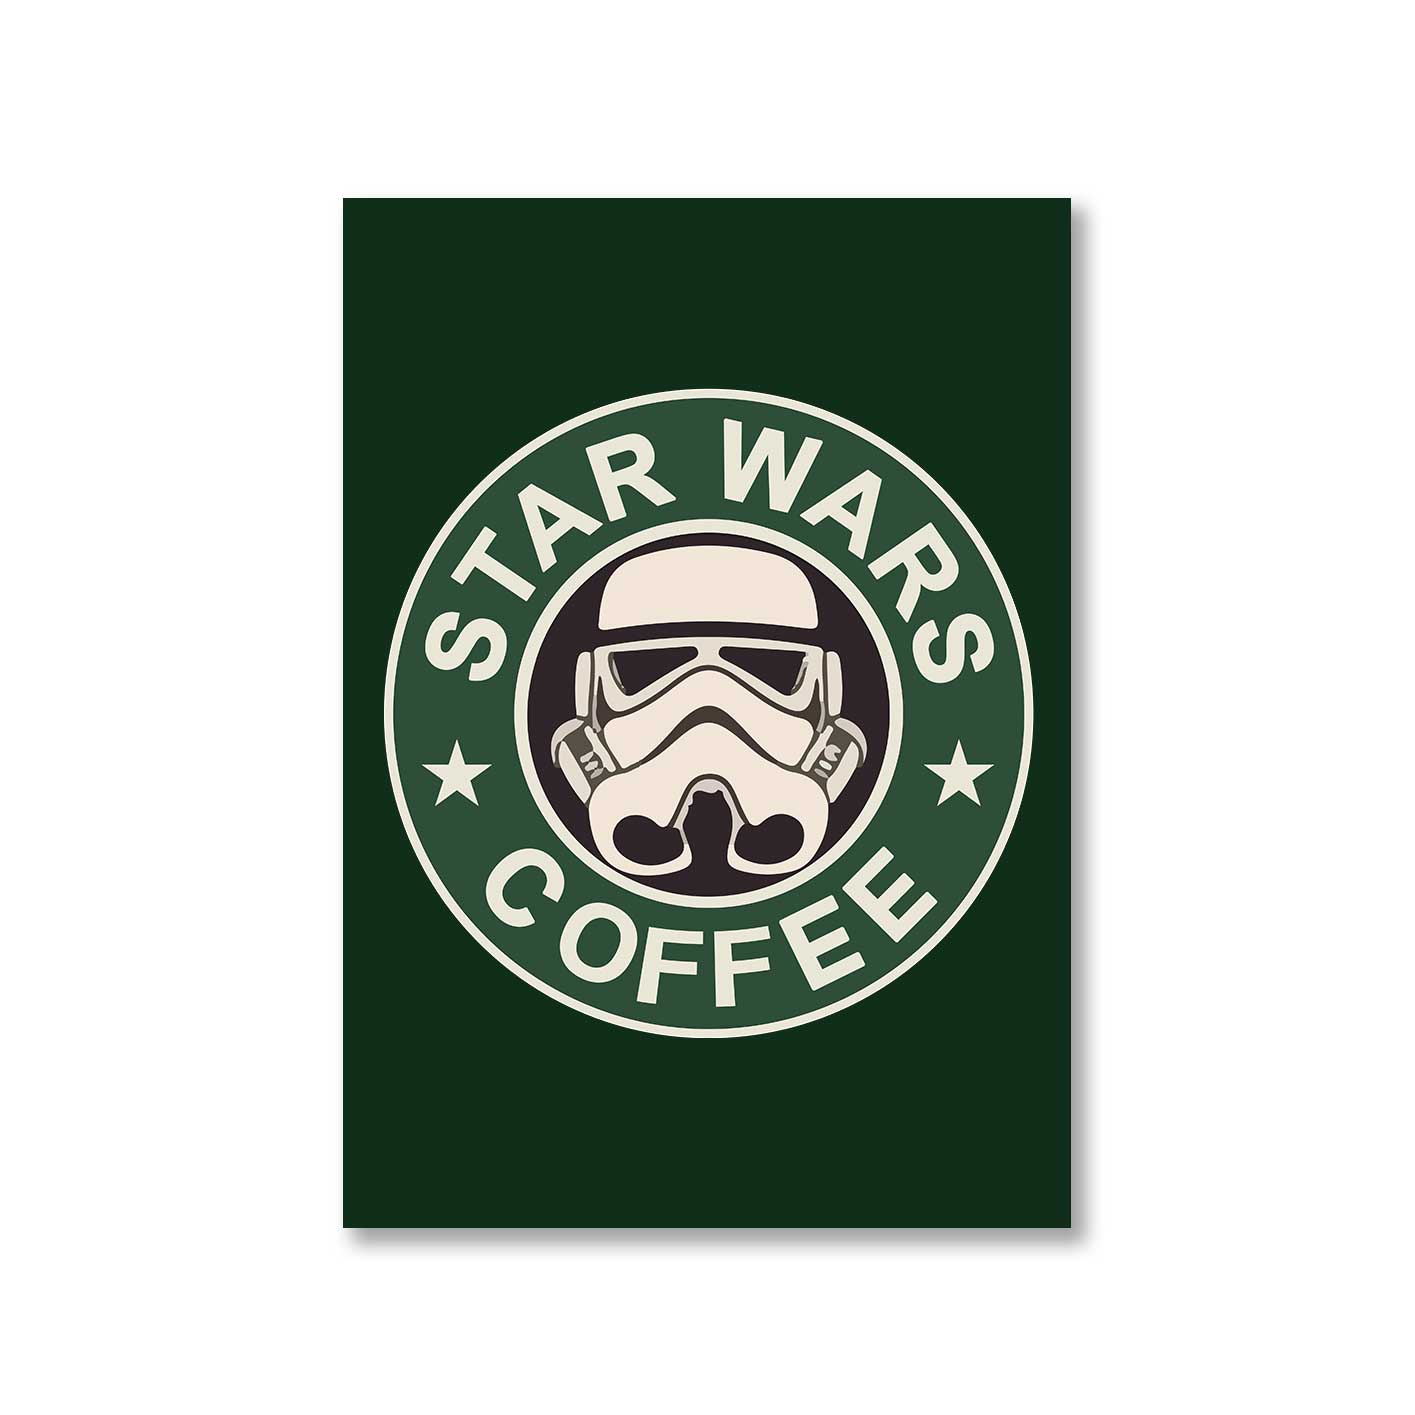 star wars star coffee poster wall art buy online united states of america usa the banyan tee tbt a4